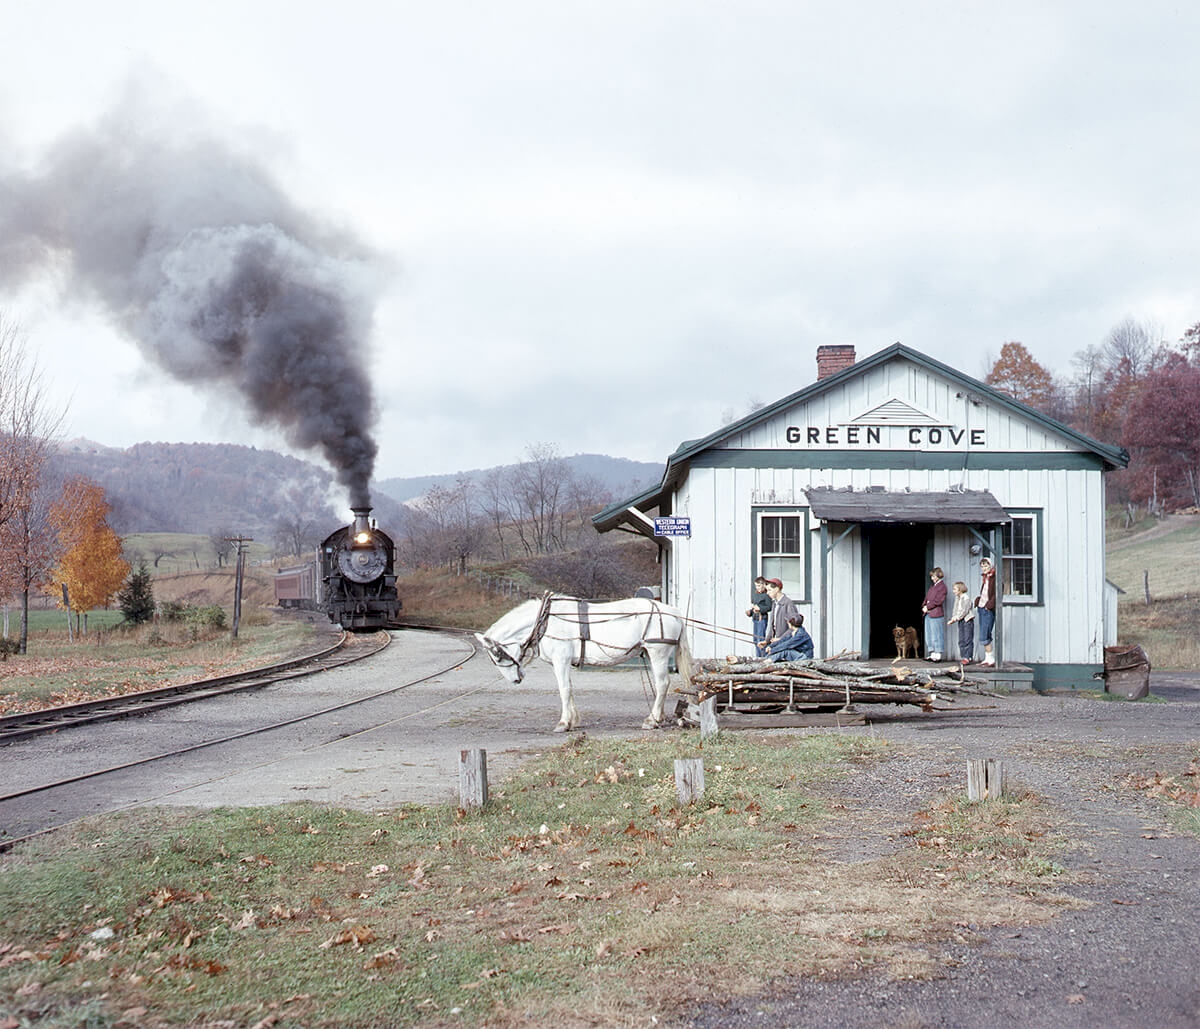 Old Maud bows to the Virginia Creeper, Green Cove, Virginia 1956, © O. Winston Link, Image Courtesy of the O. Winston Link Museum